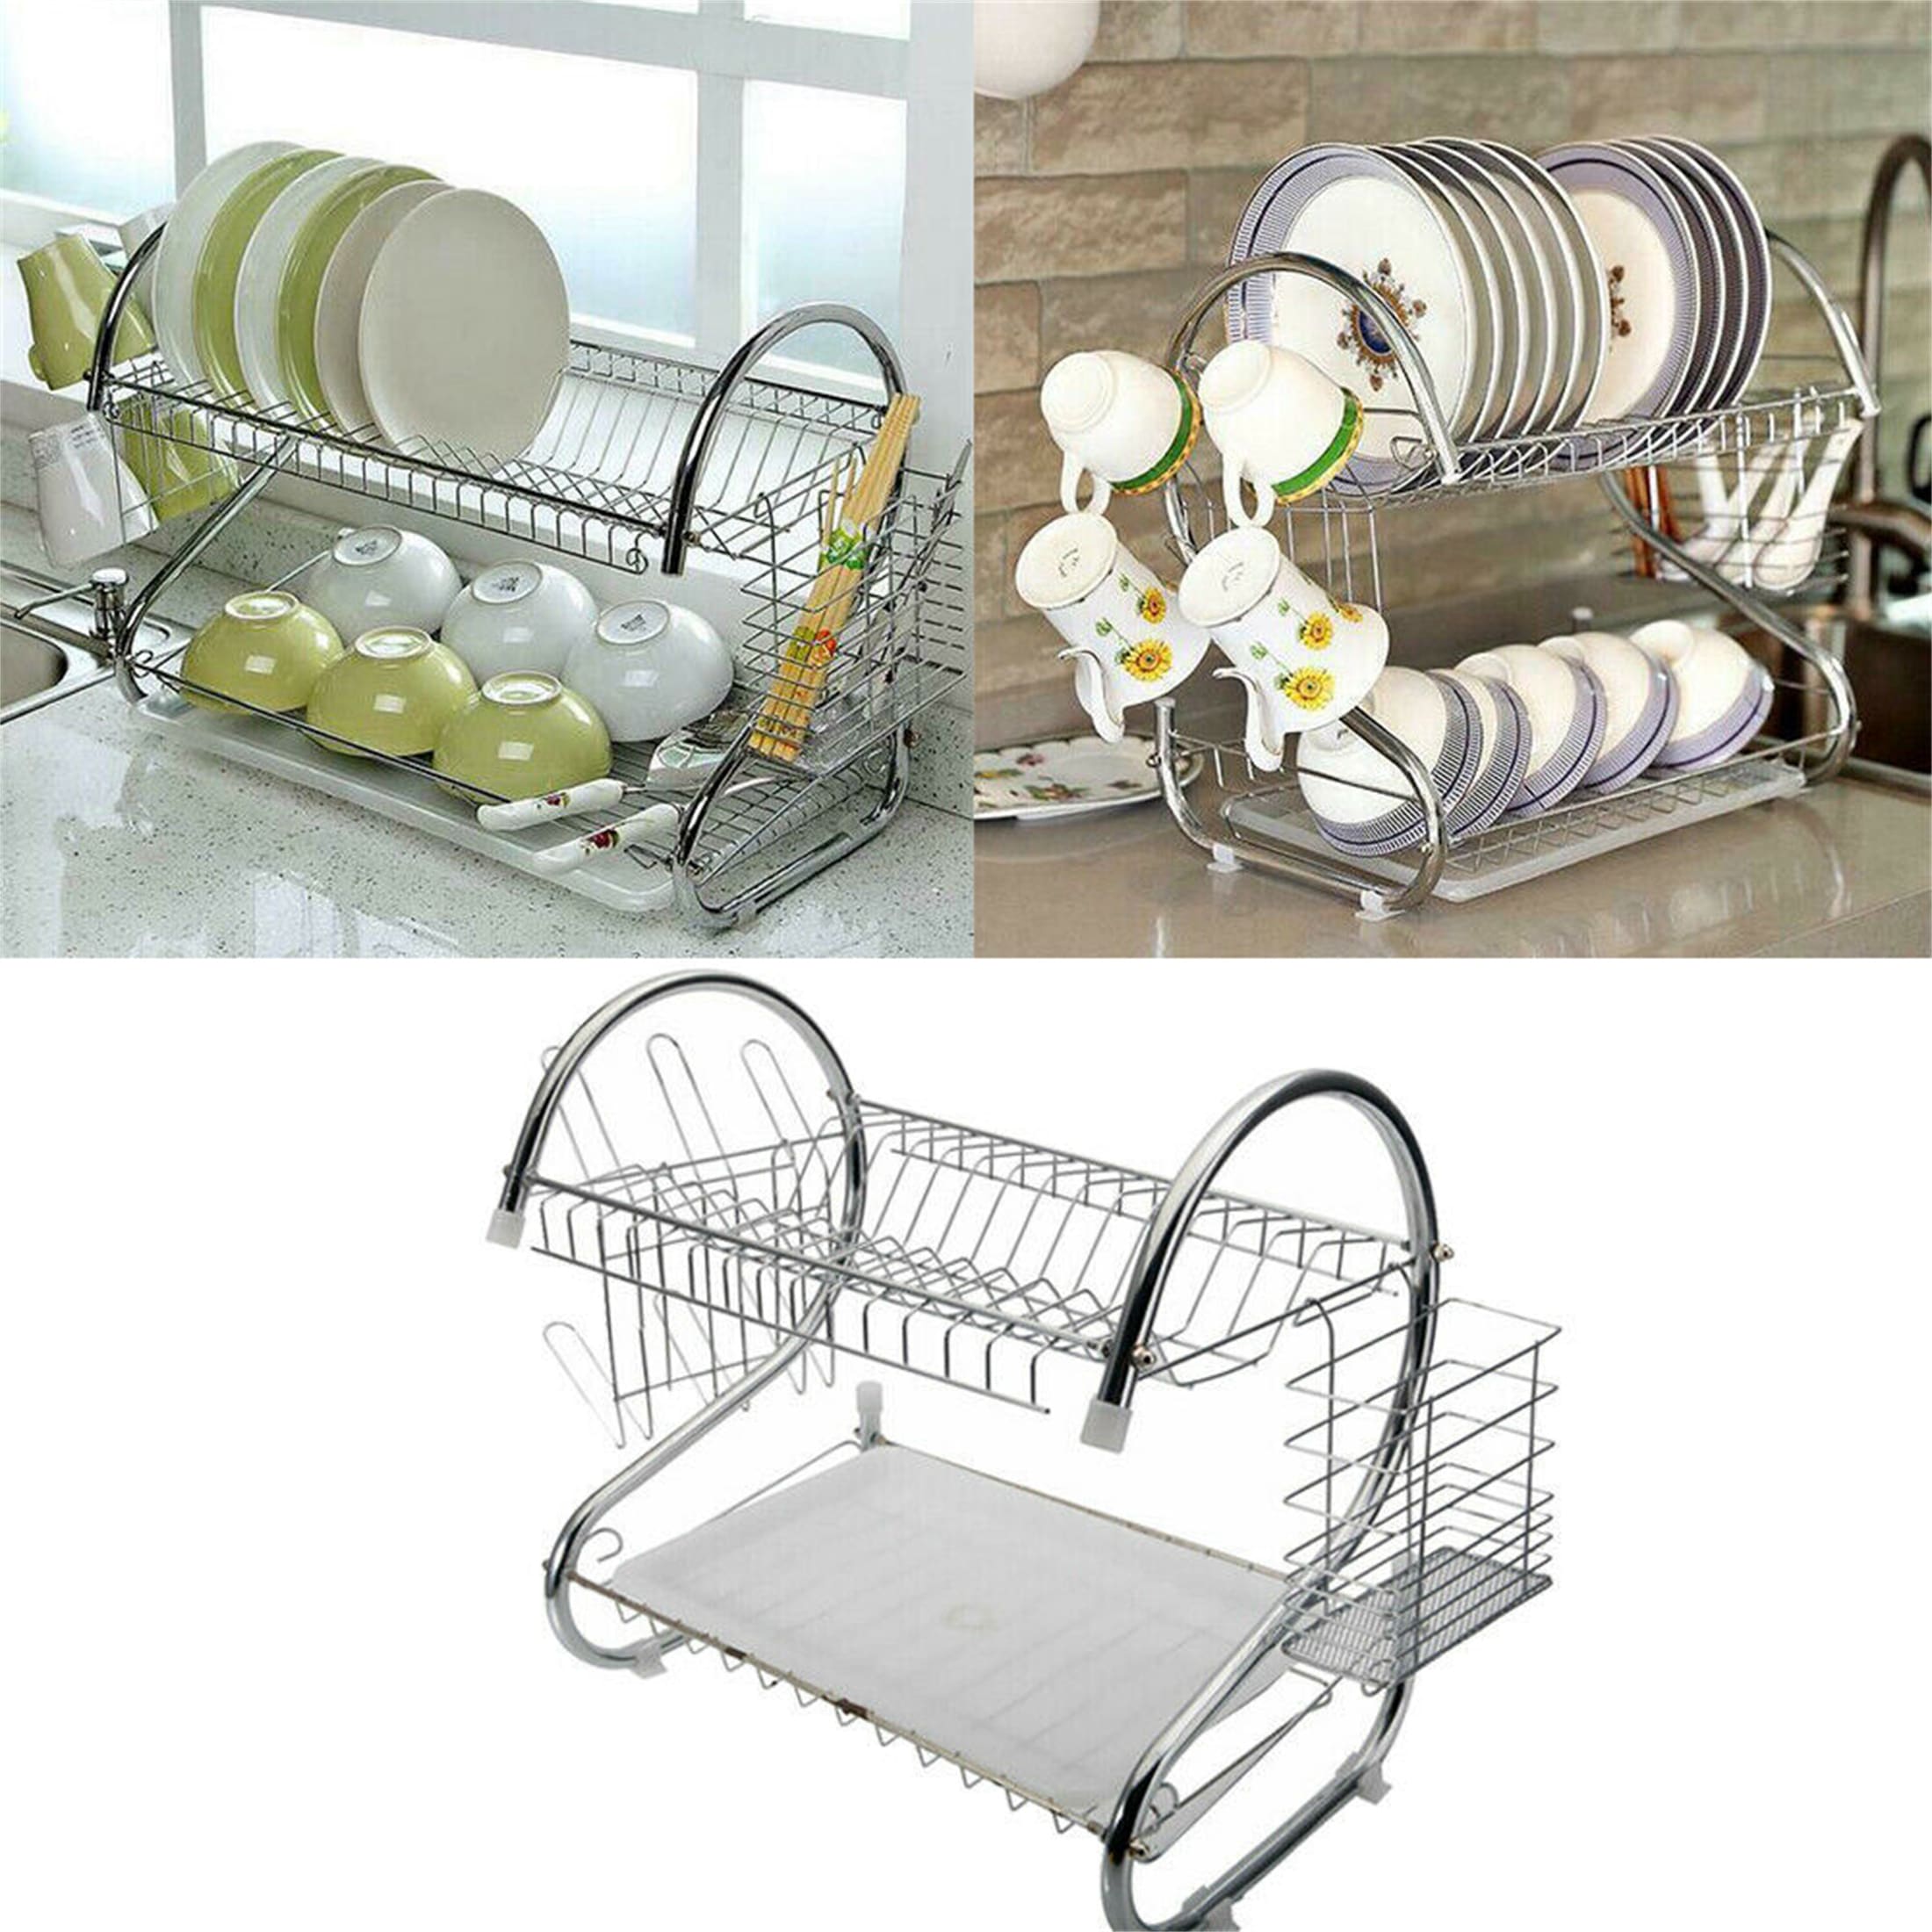 https://ak1.ostkcdn.com/images/products/is/images/direct/61f028b9dbe3584fcc9236bbbc918ed10207977e/2-Tier-Dish-Drying-Rack-Drainer-Stainless-Steel-Kitchen-Cutlery-Holder.jpg